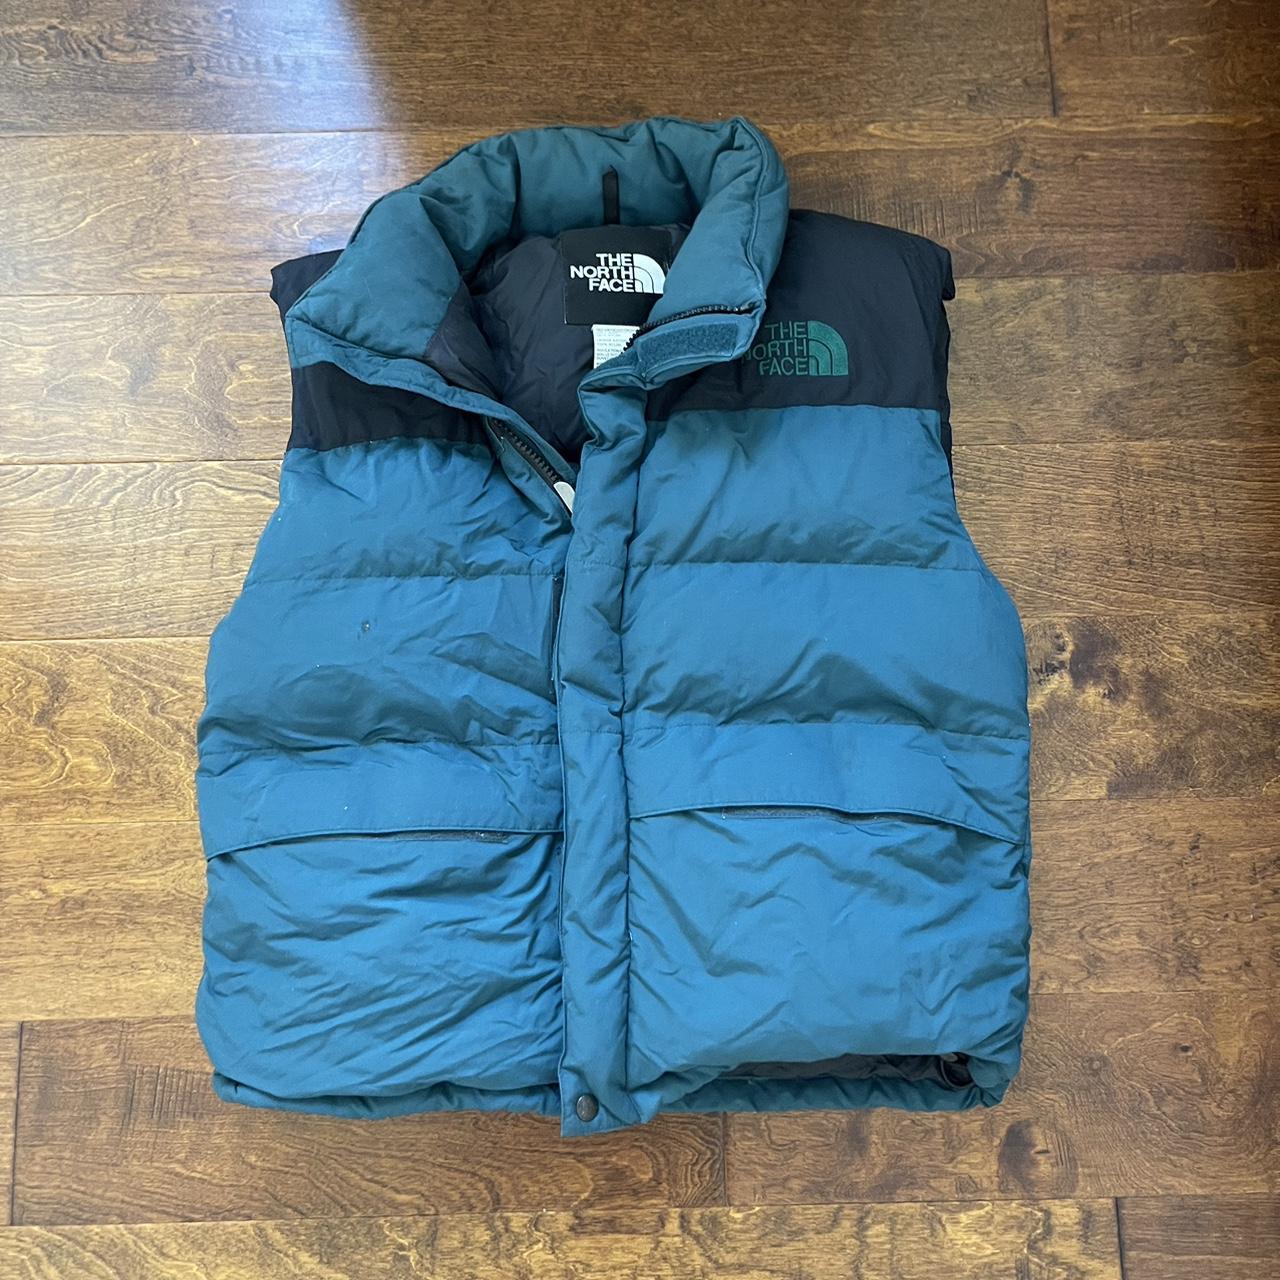 Vintage North face puffer vest -in perfect... - Depop